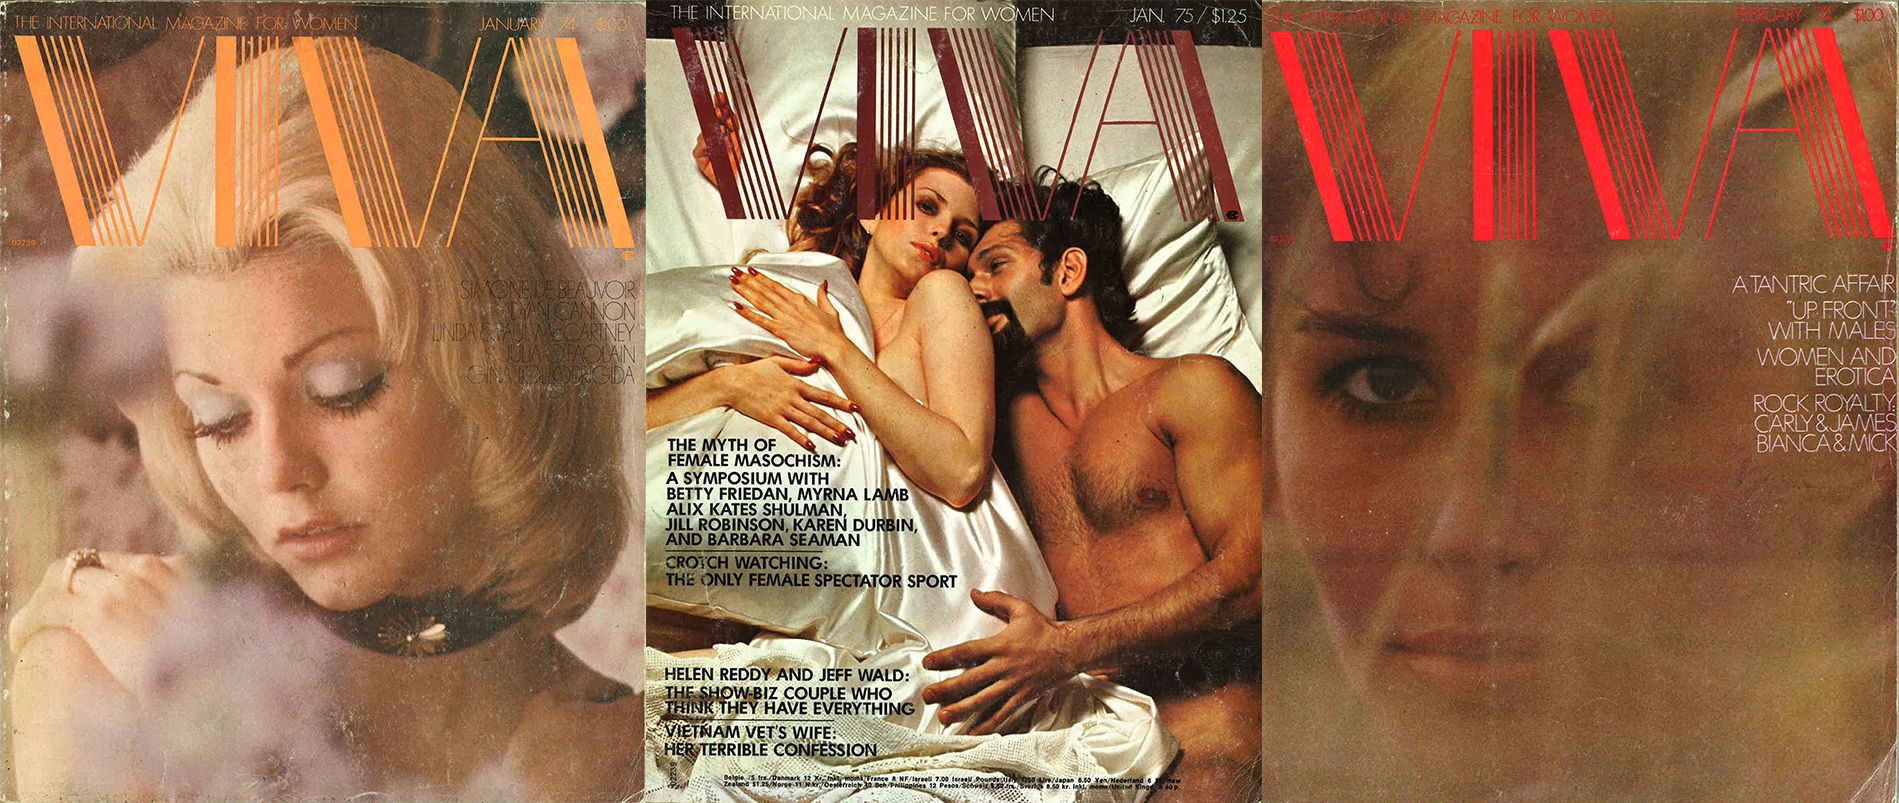 John Persons Porn Magazines - An Oral History of Viva, the '70s Porn Magazine for Women